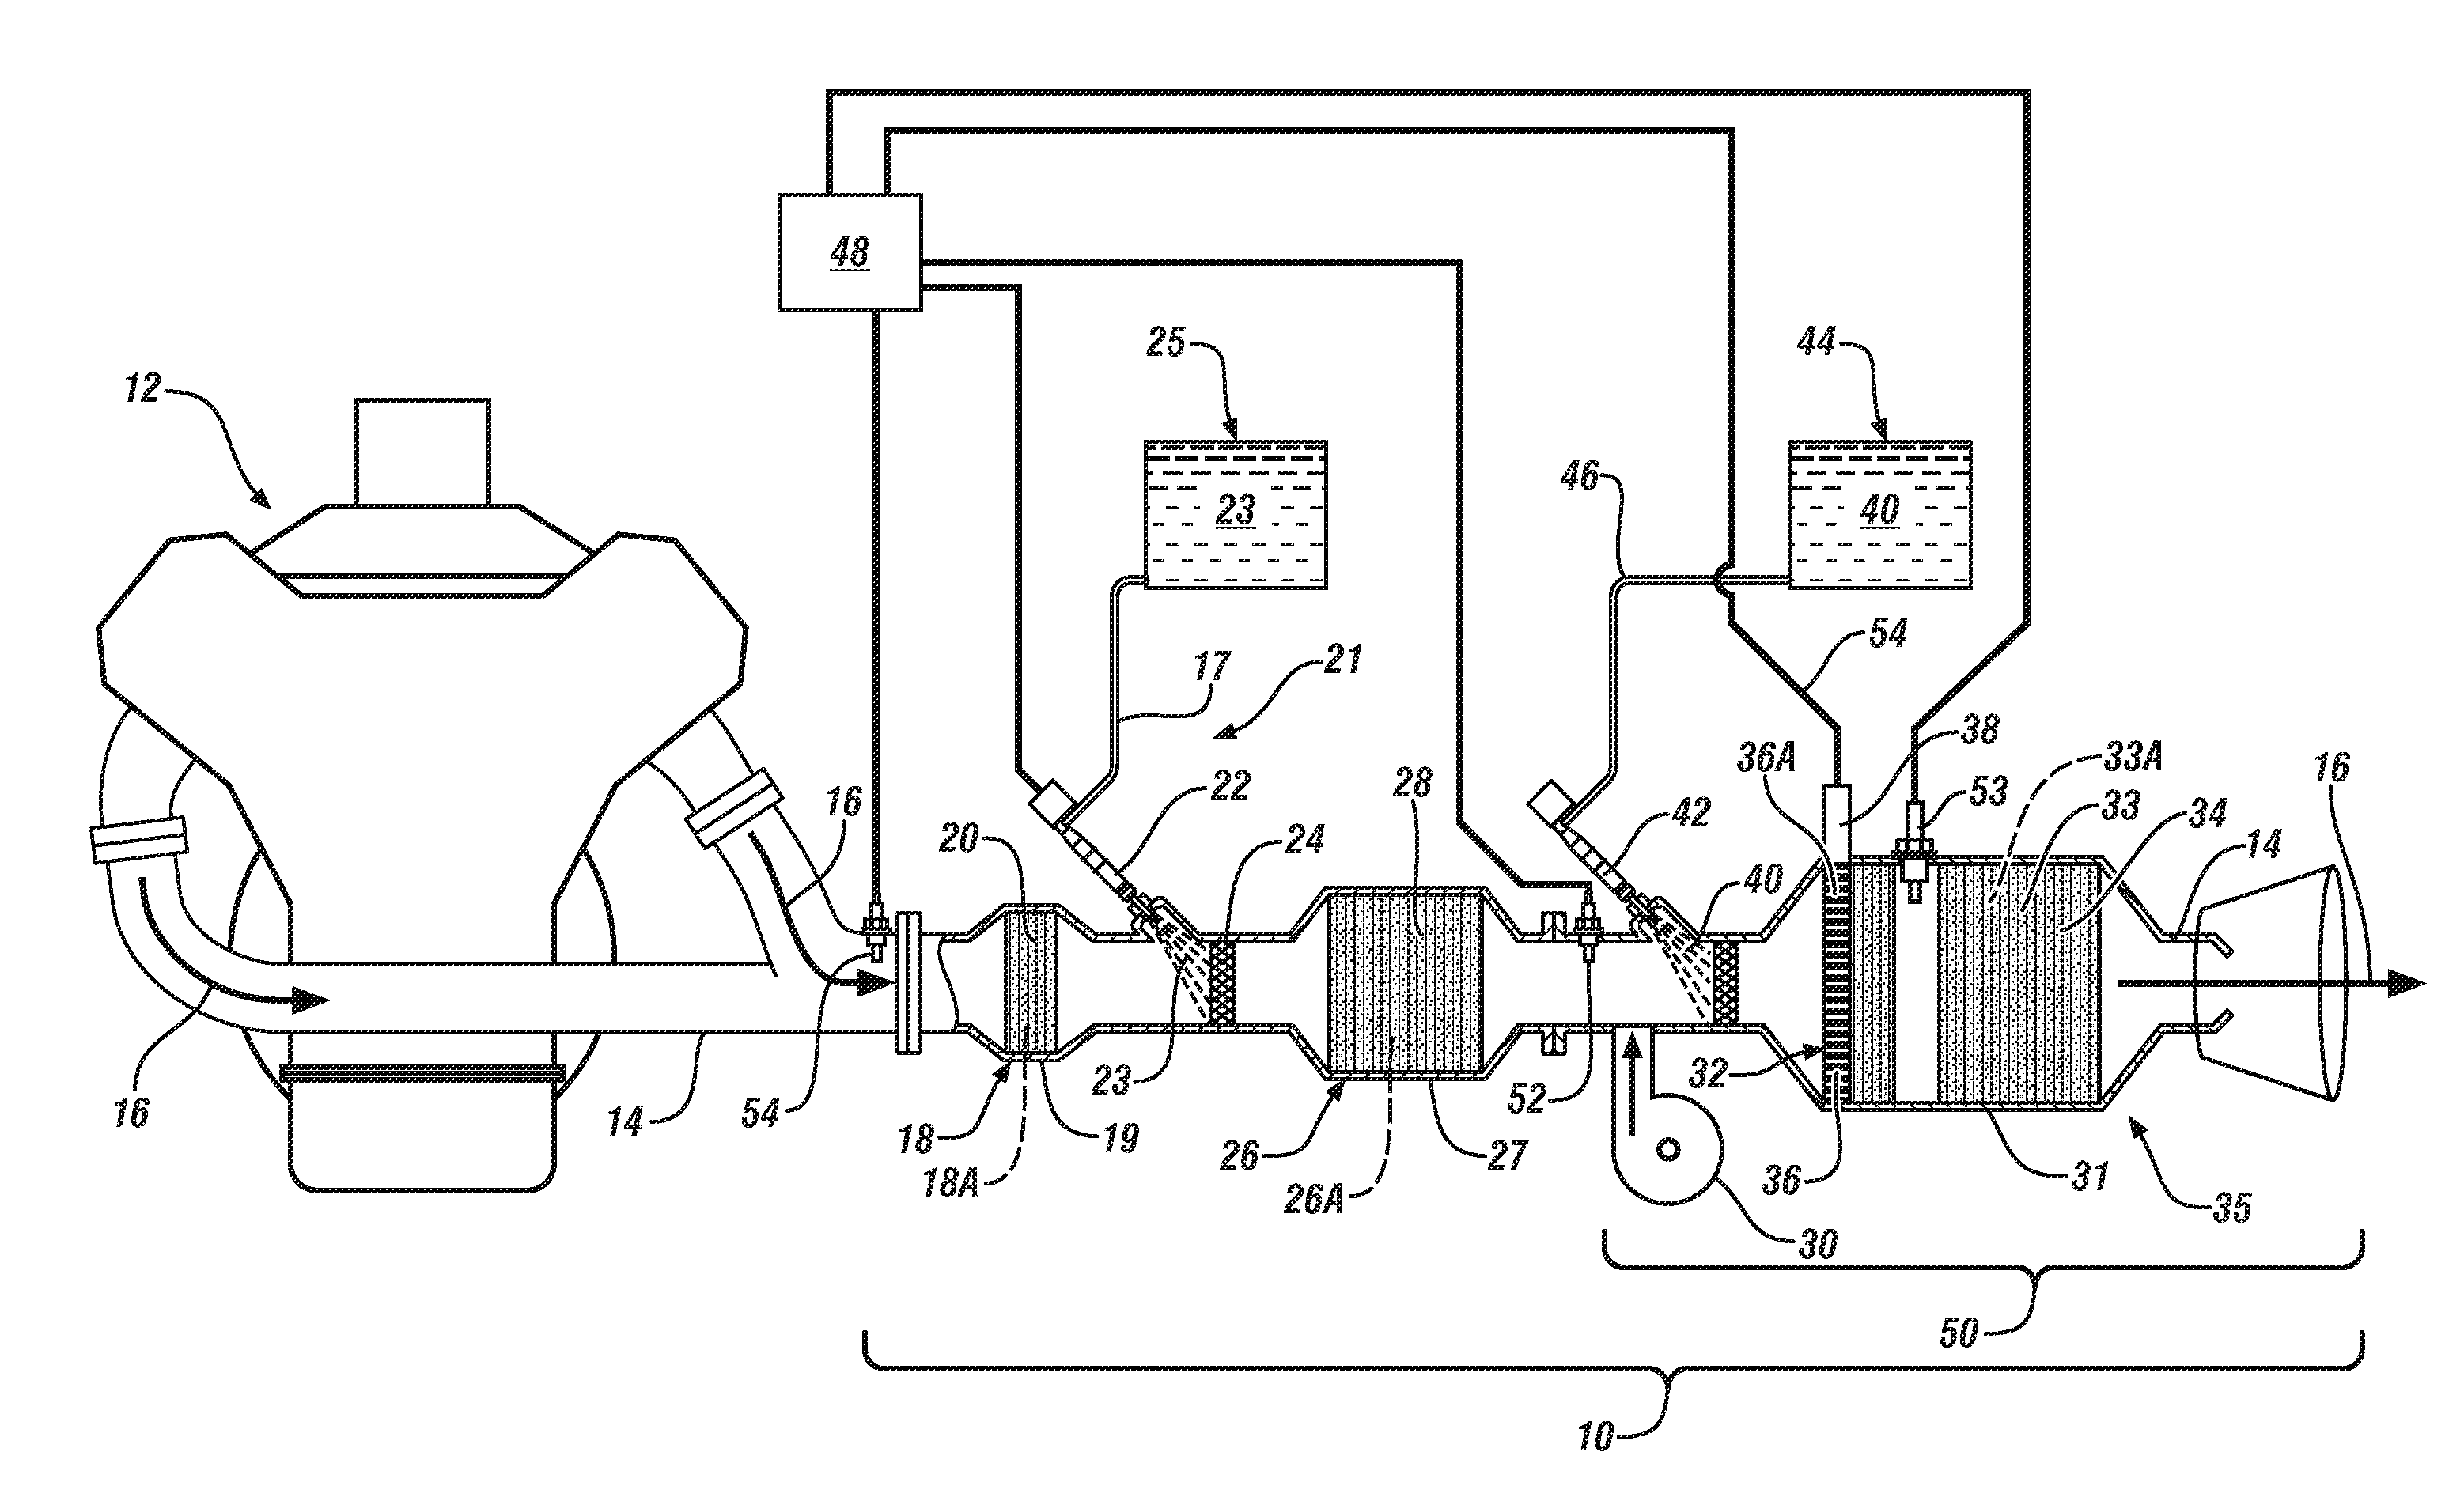 Control apparatus for temperature excursions within an exhaust gas treatment system